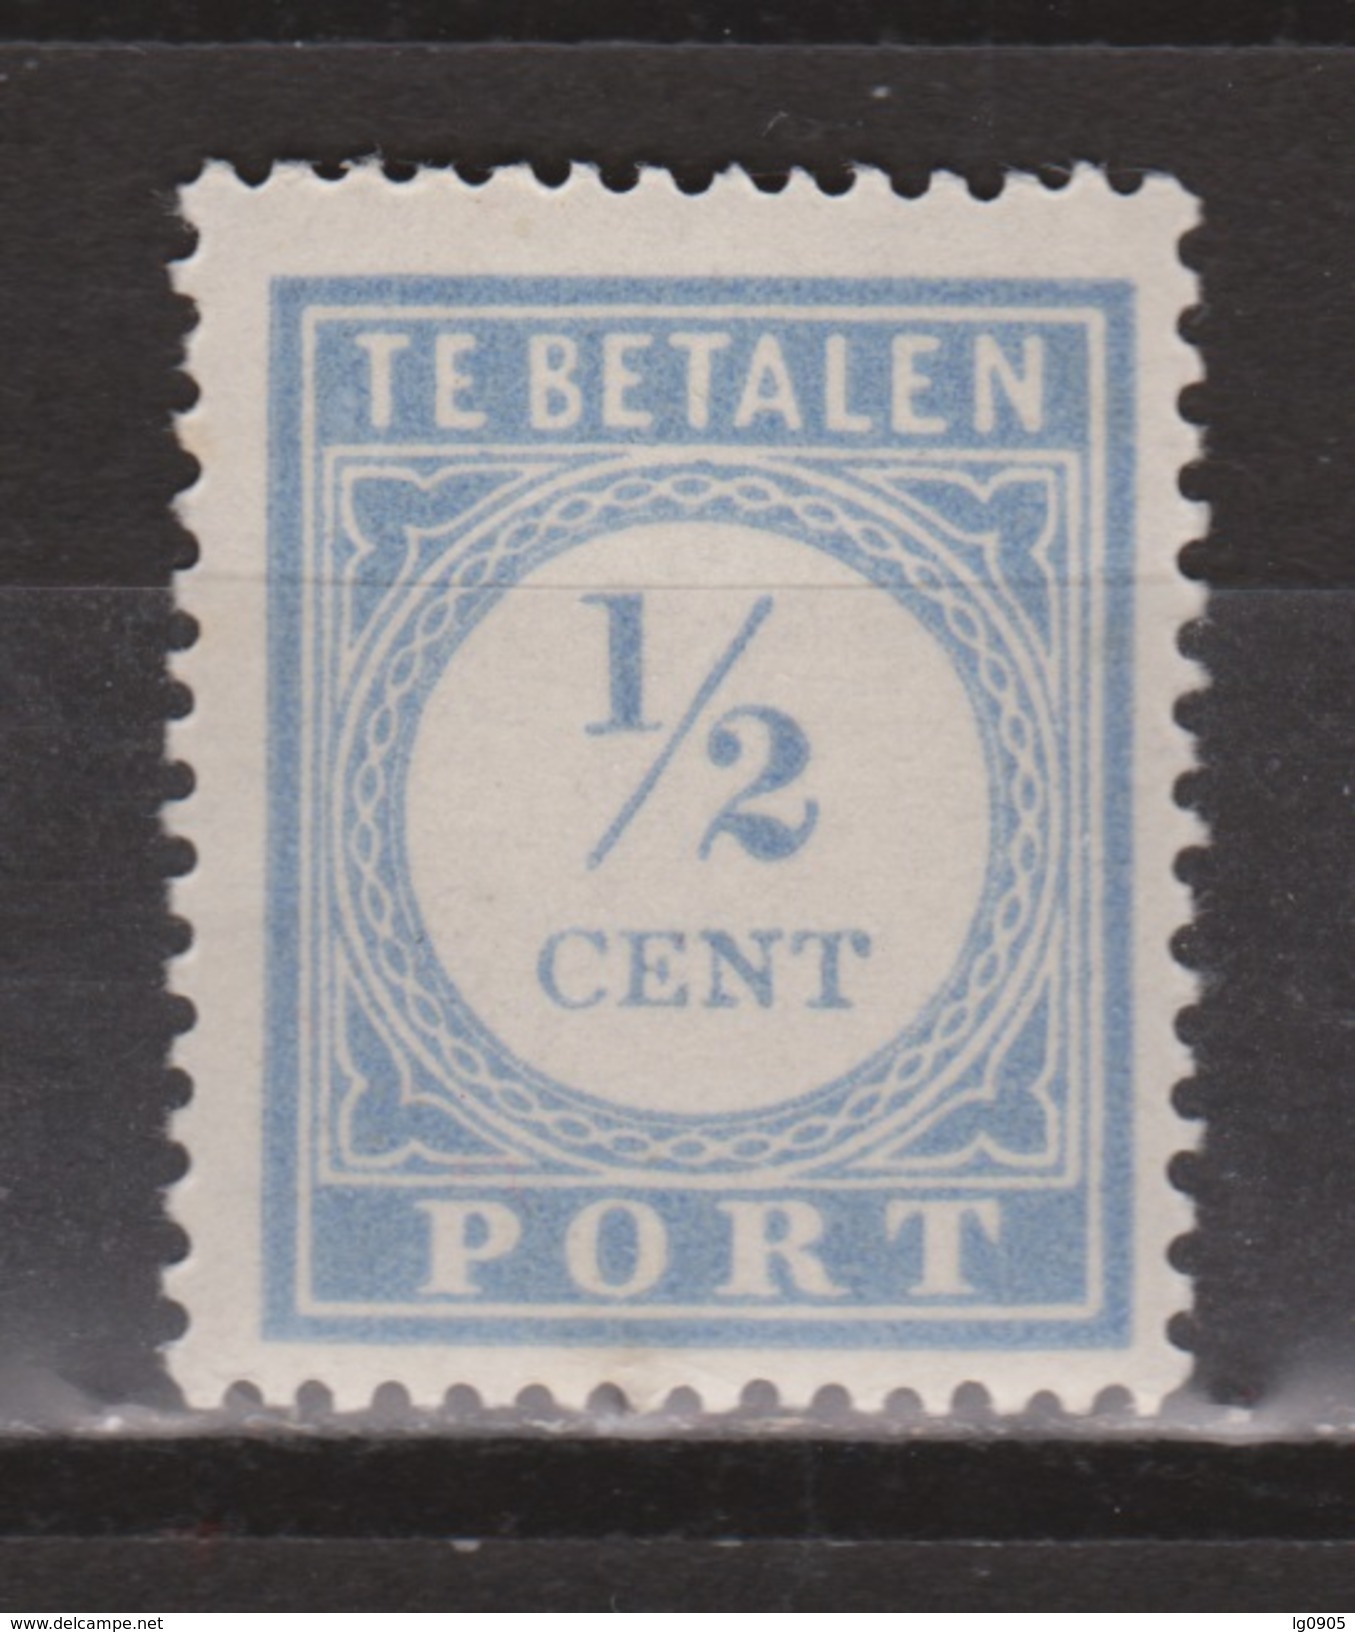 NVPH Nederland Netherlands Pays Bas Holanda 44 MLH ; Port Timbre-taxe Postmarke Sellos De Correos NOW MANY DUE STAMPS - Postage Due